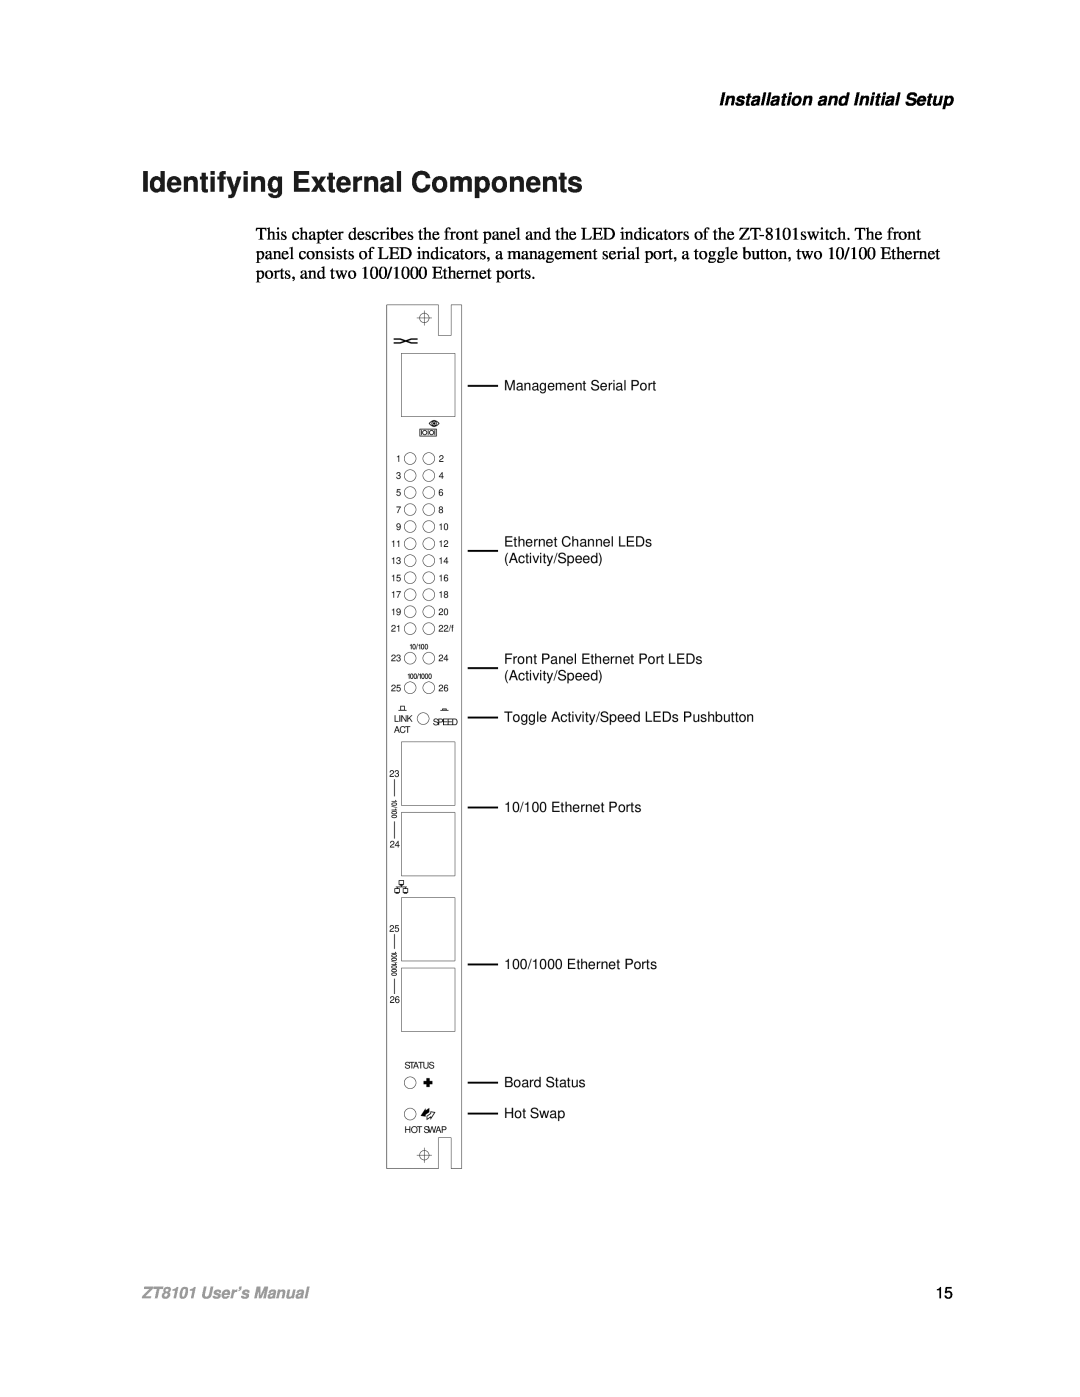 Intel ZT8101 user manual Identifying External Components, Installation and Initial Setup 